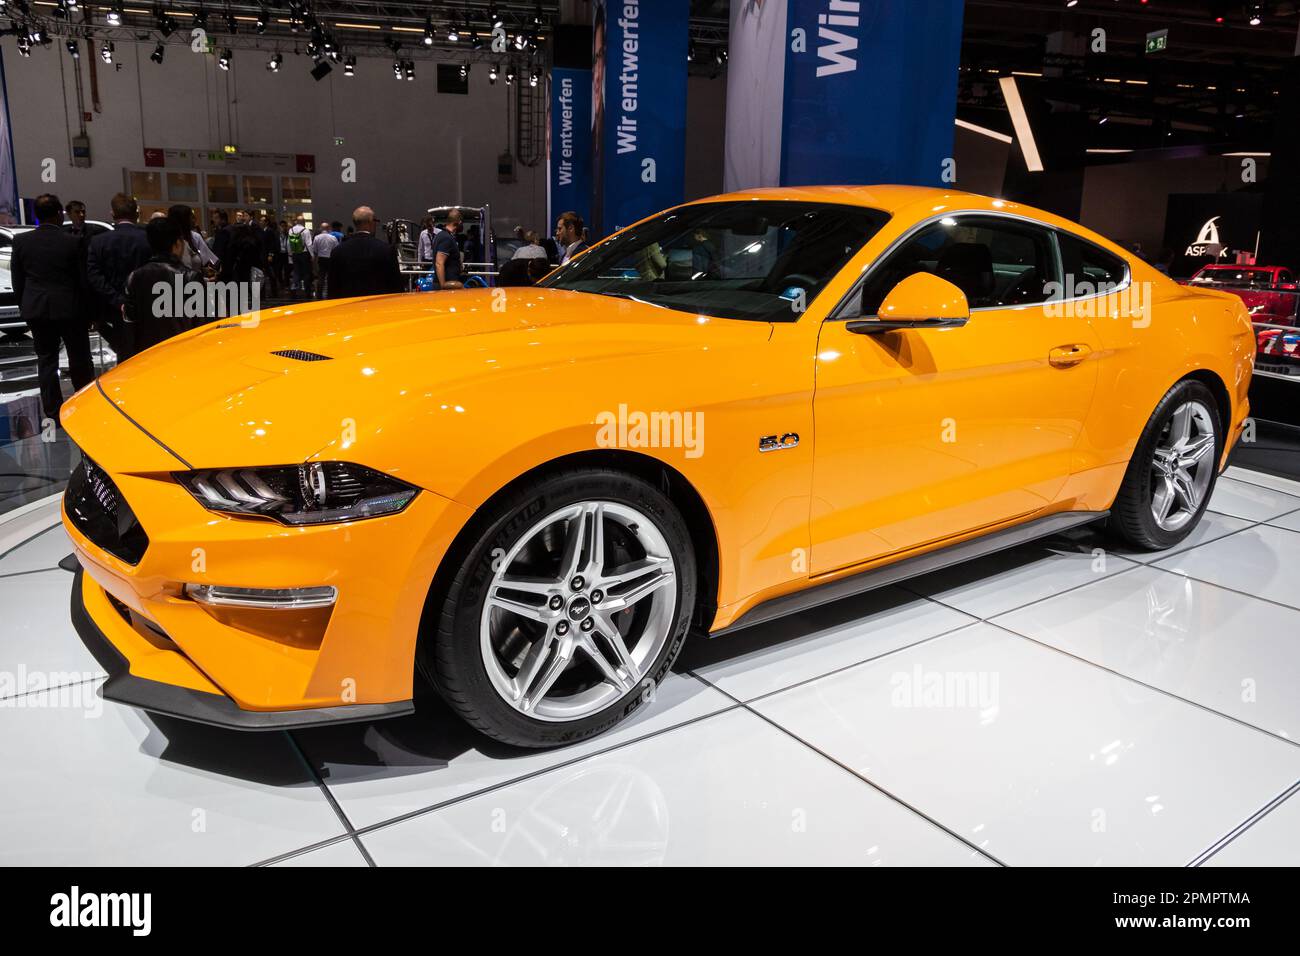 Ford Mustang GT sports car at the Frankfurt IAA Motor Show. Germany - September 12, 2017. Stock Photo